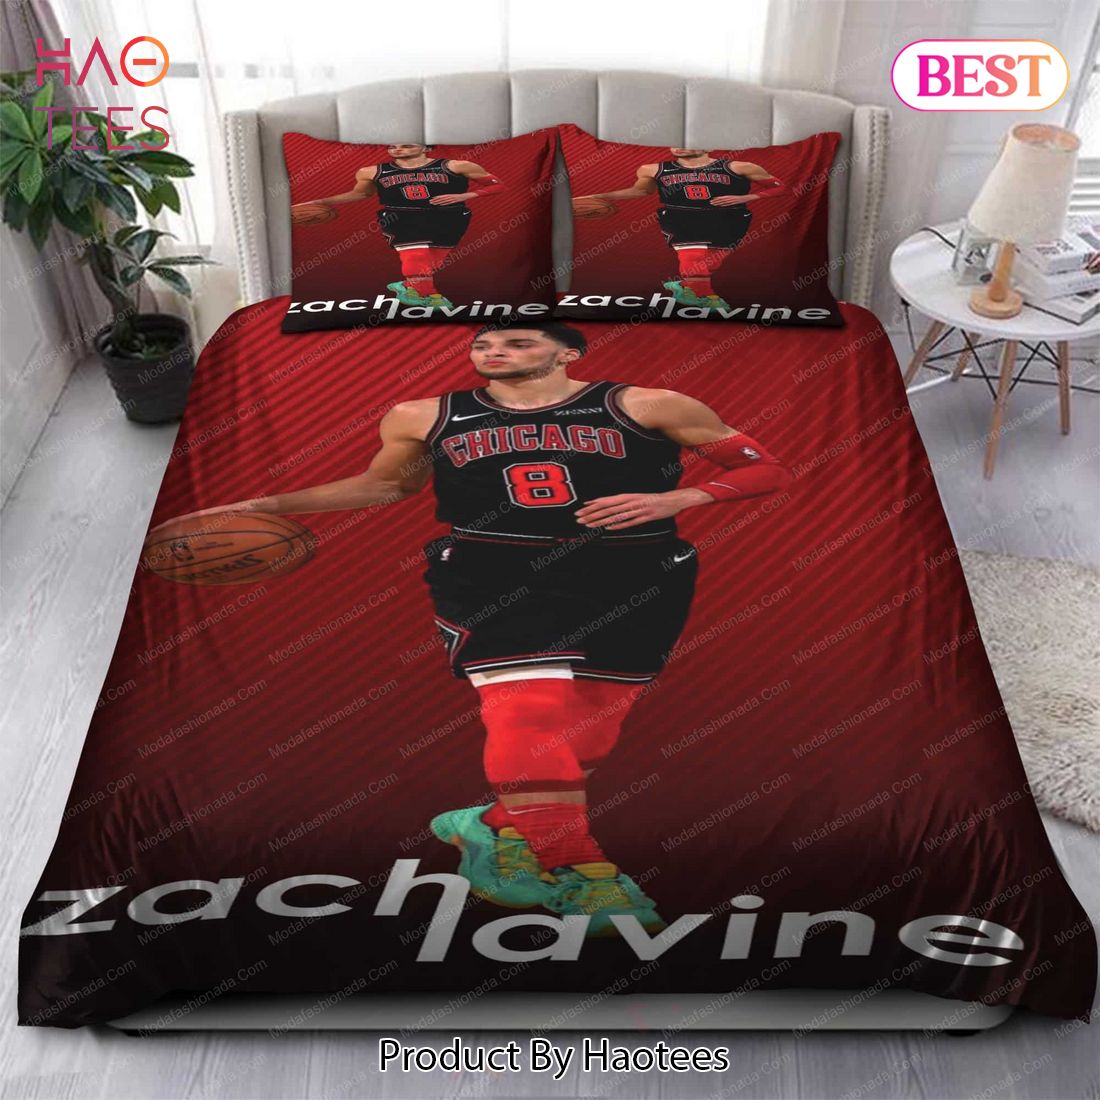 Zach LaVine Poster For Real Fans - Trends Bedding